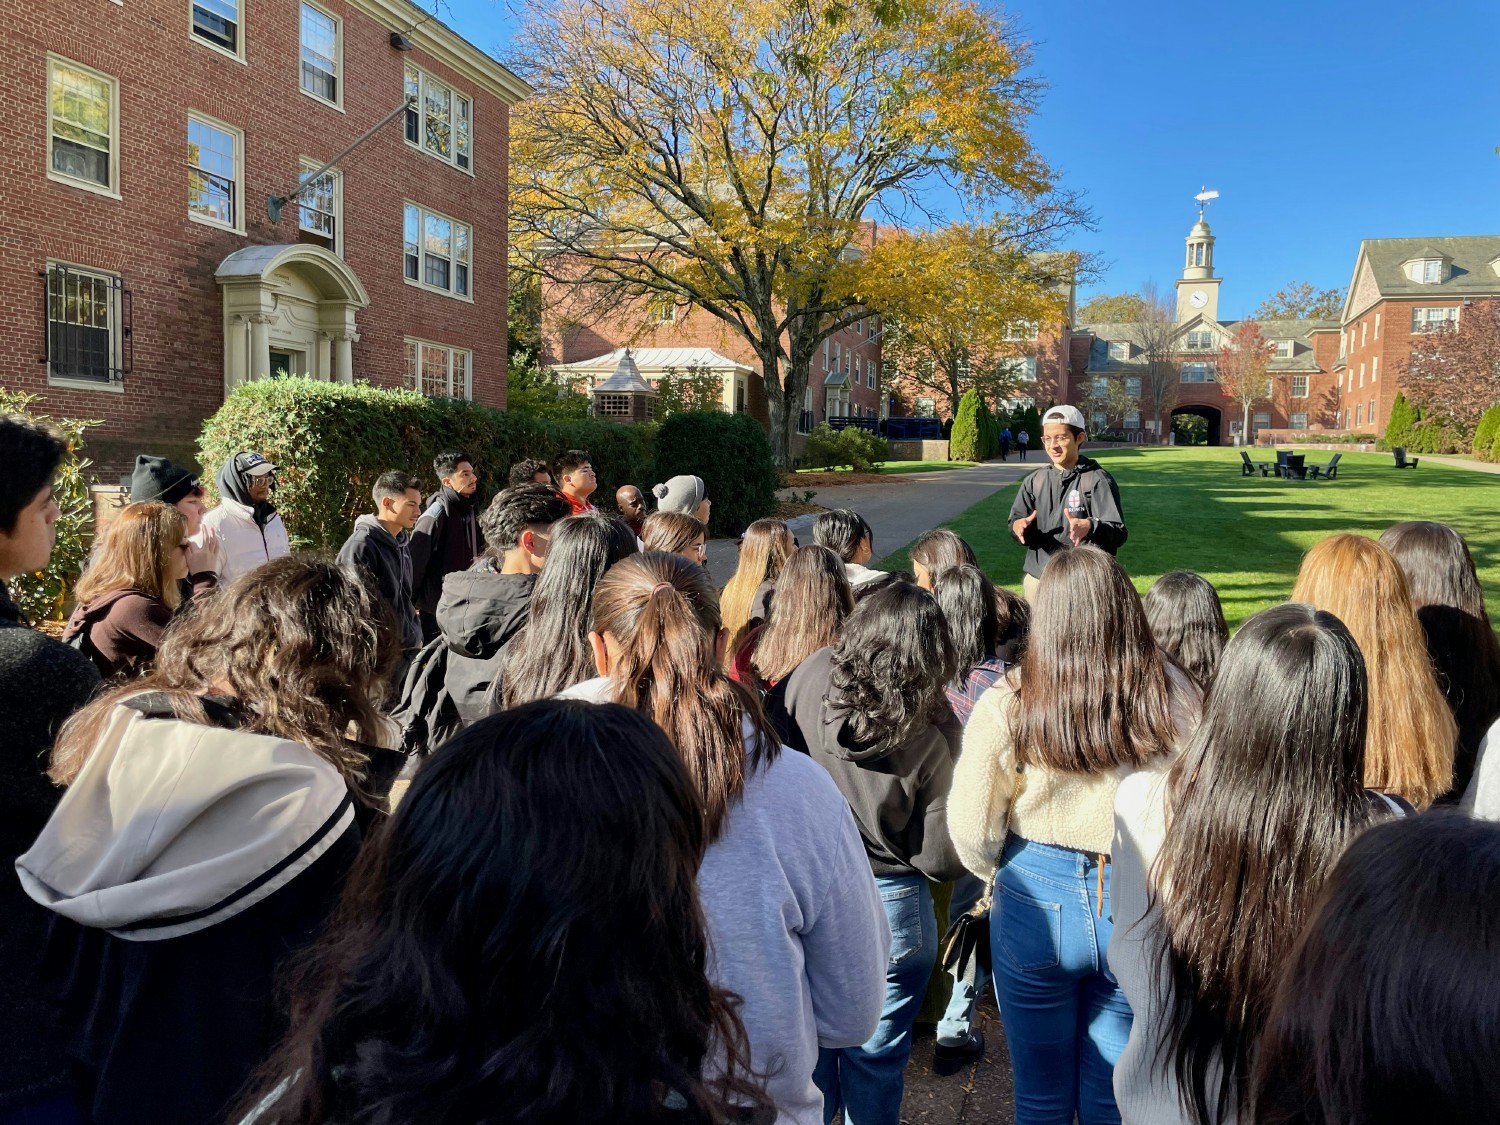 Alumni of Equipo like Brandon Avendano '19 at Brown University welcome younger students onto their campuses to visit.